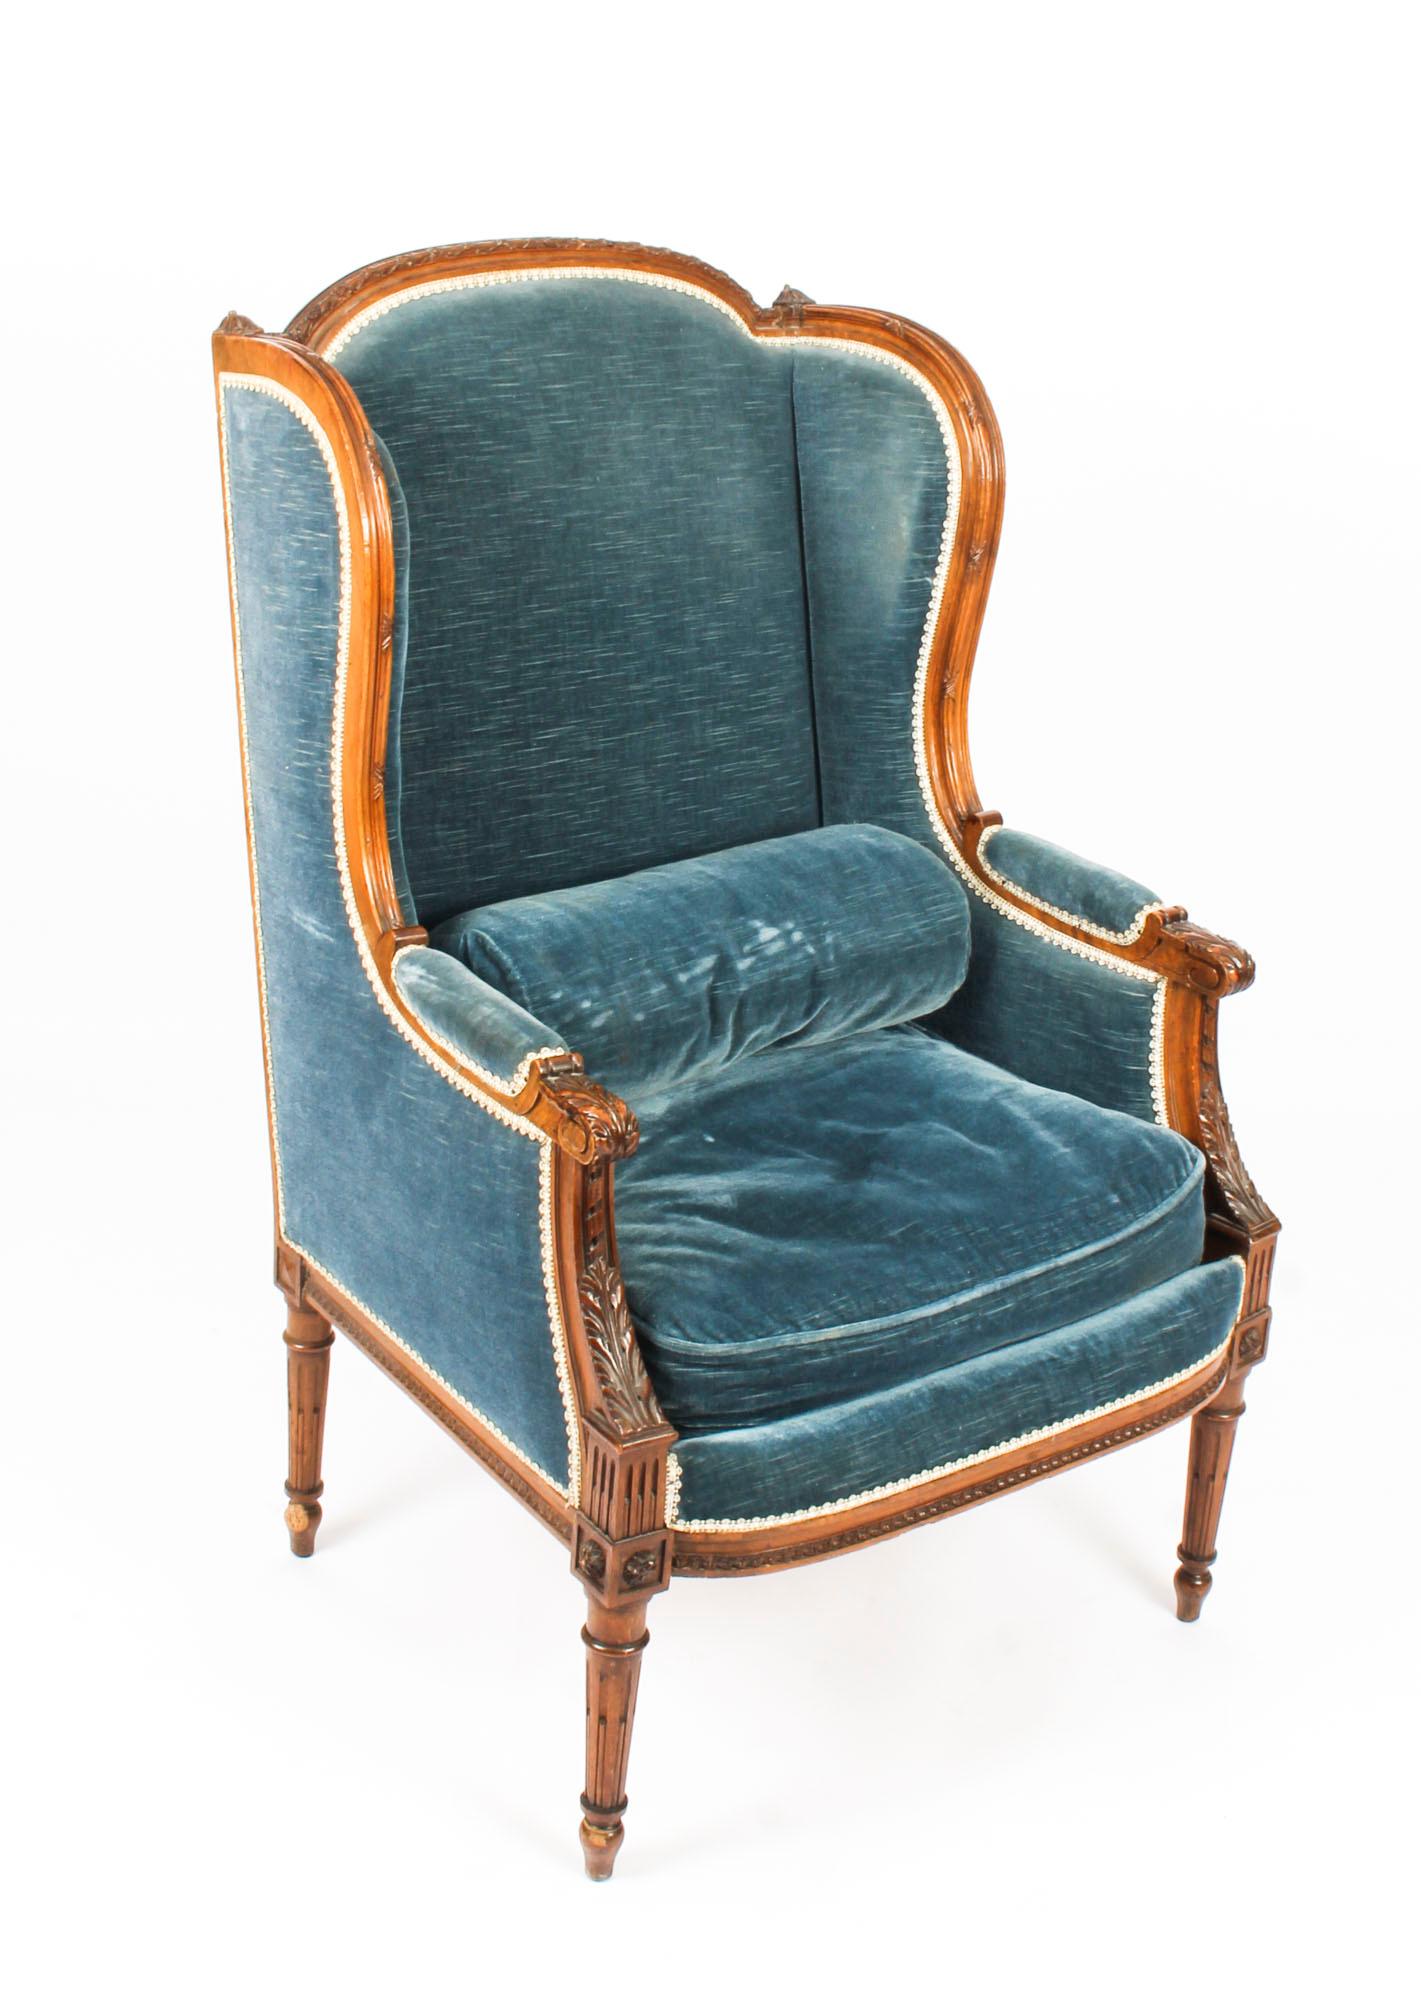 This is an elegant antique pair of mahogany Louis revival wingback armchairs, circa 1880 in date. 

The mahogany is beautiful in color and features skilfully carved acanthus leaf decoration. They are upholstered in sapphire blue velvet with